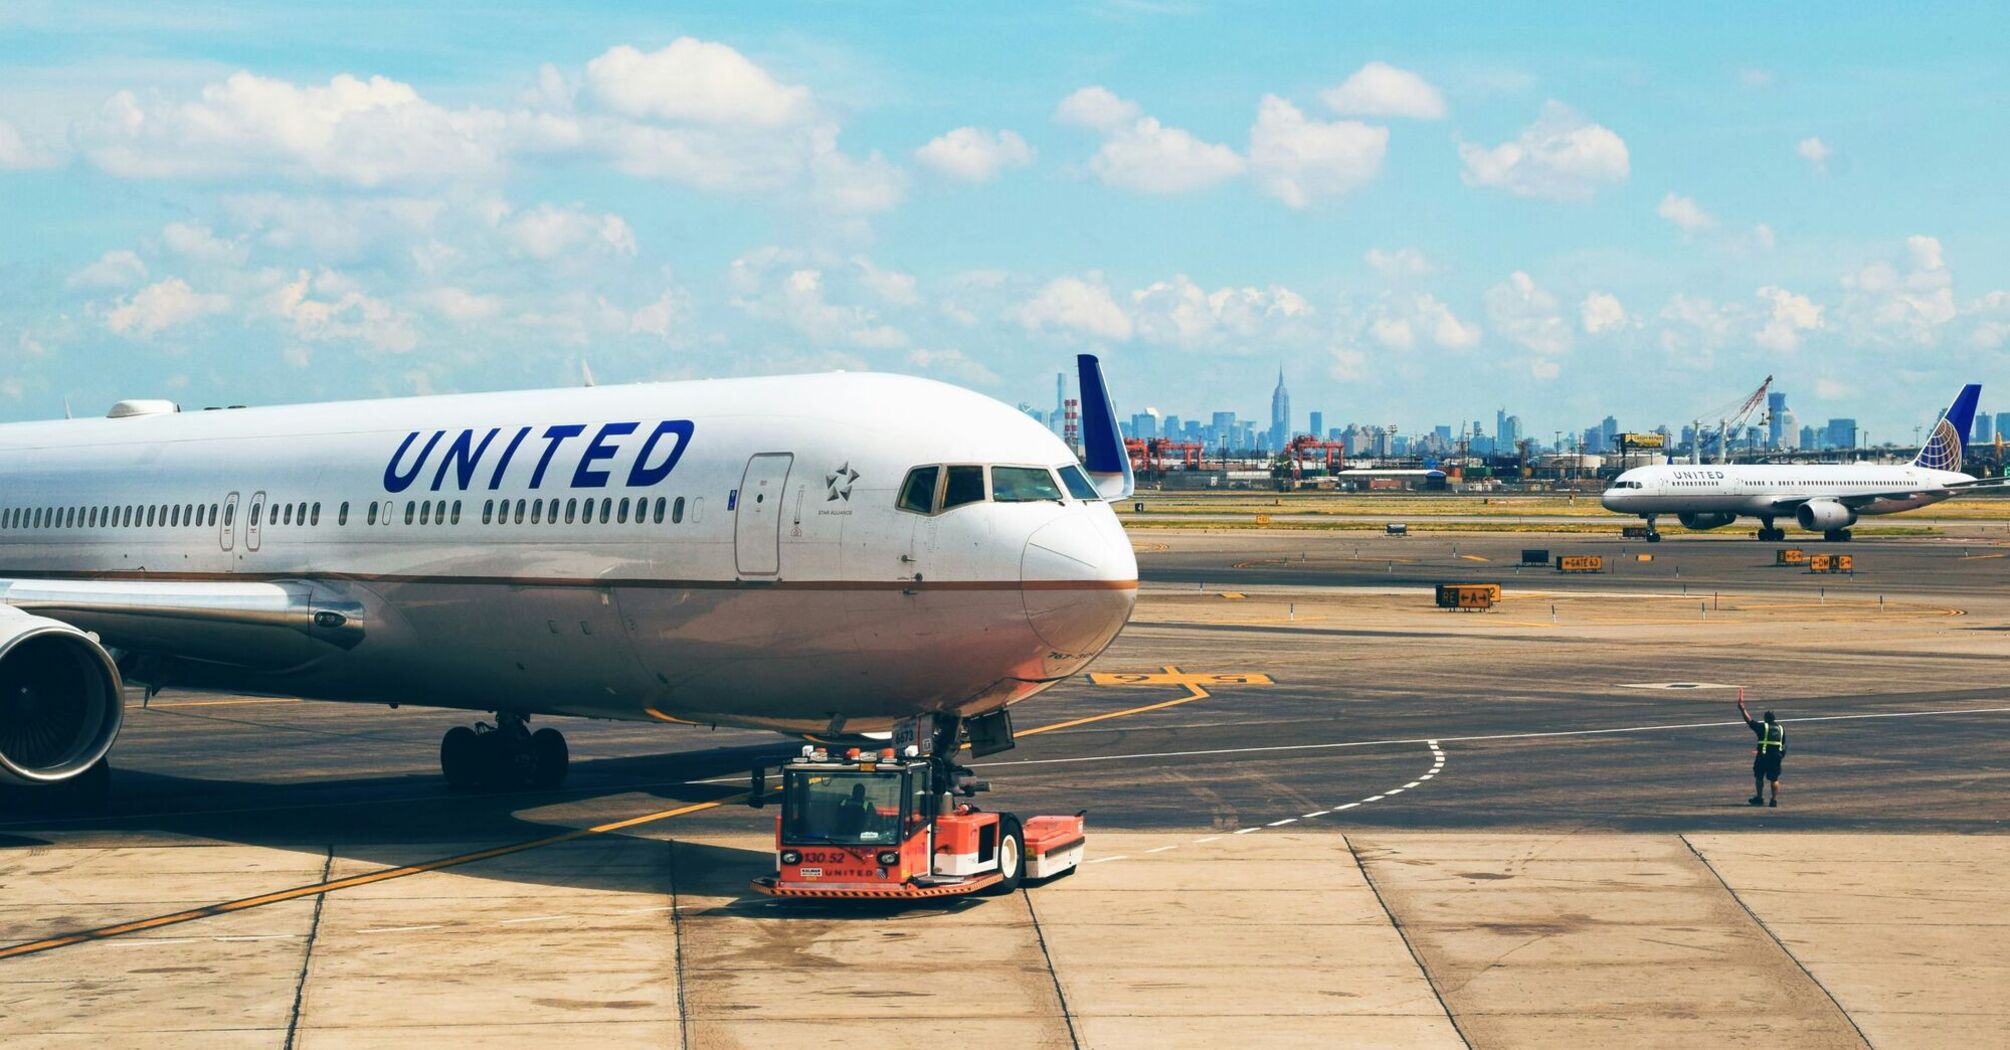 United Airlines aircraft being towed on the tarmac at an airport, with the city skyline in the background